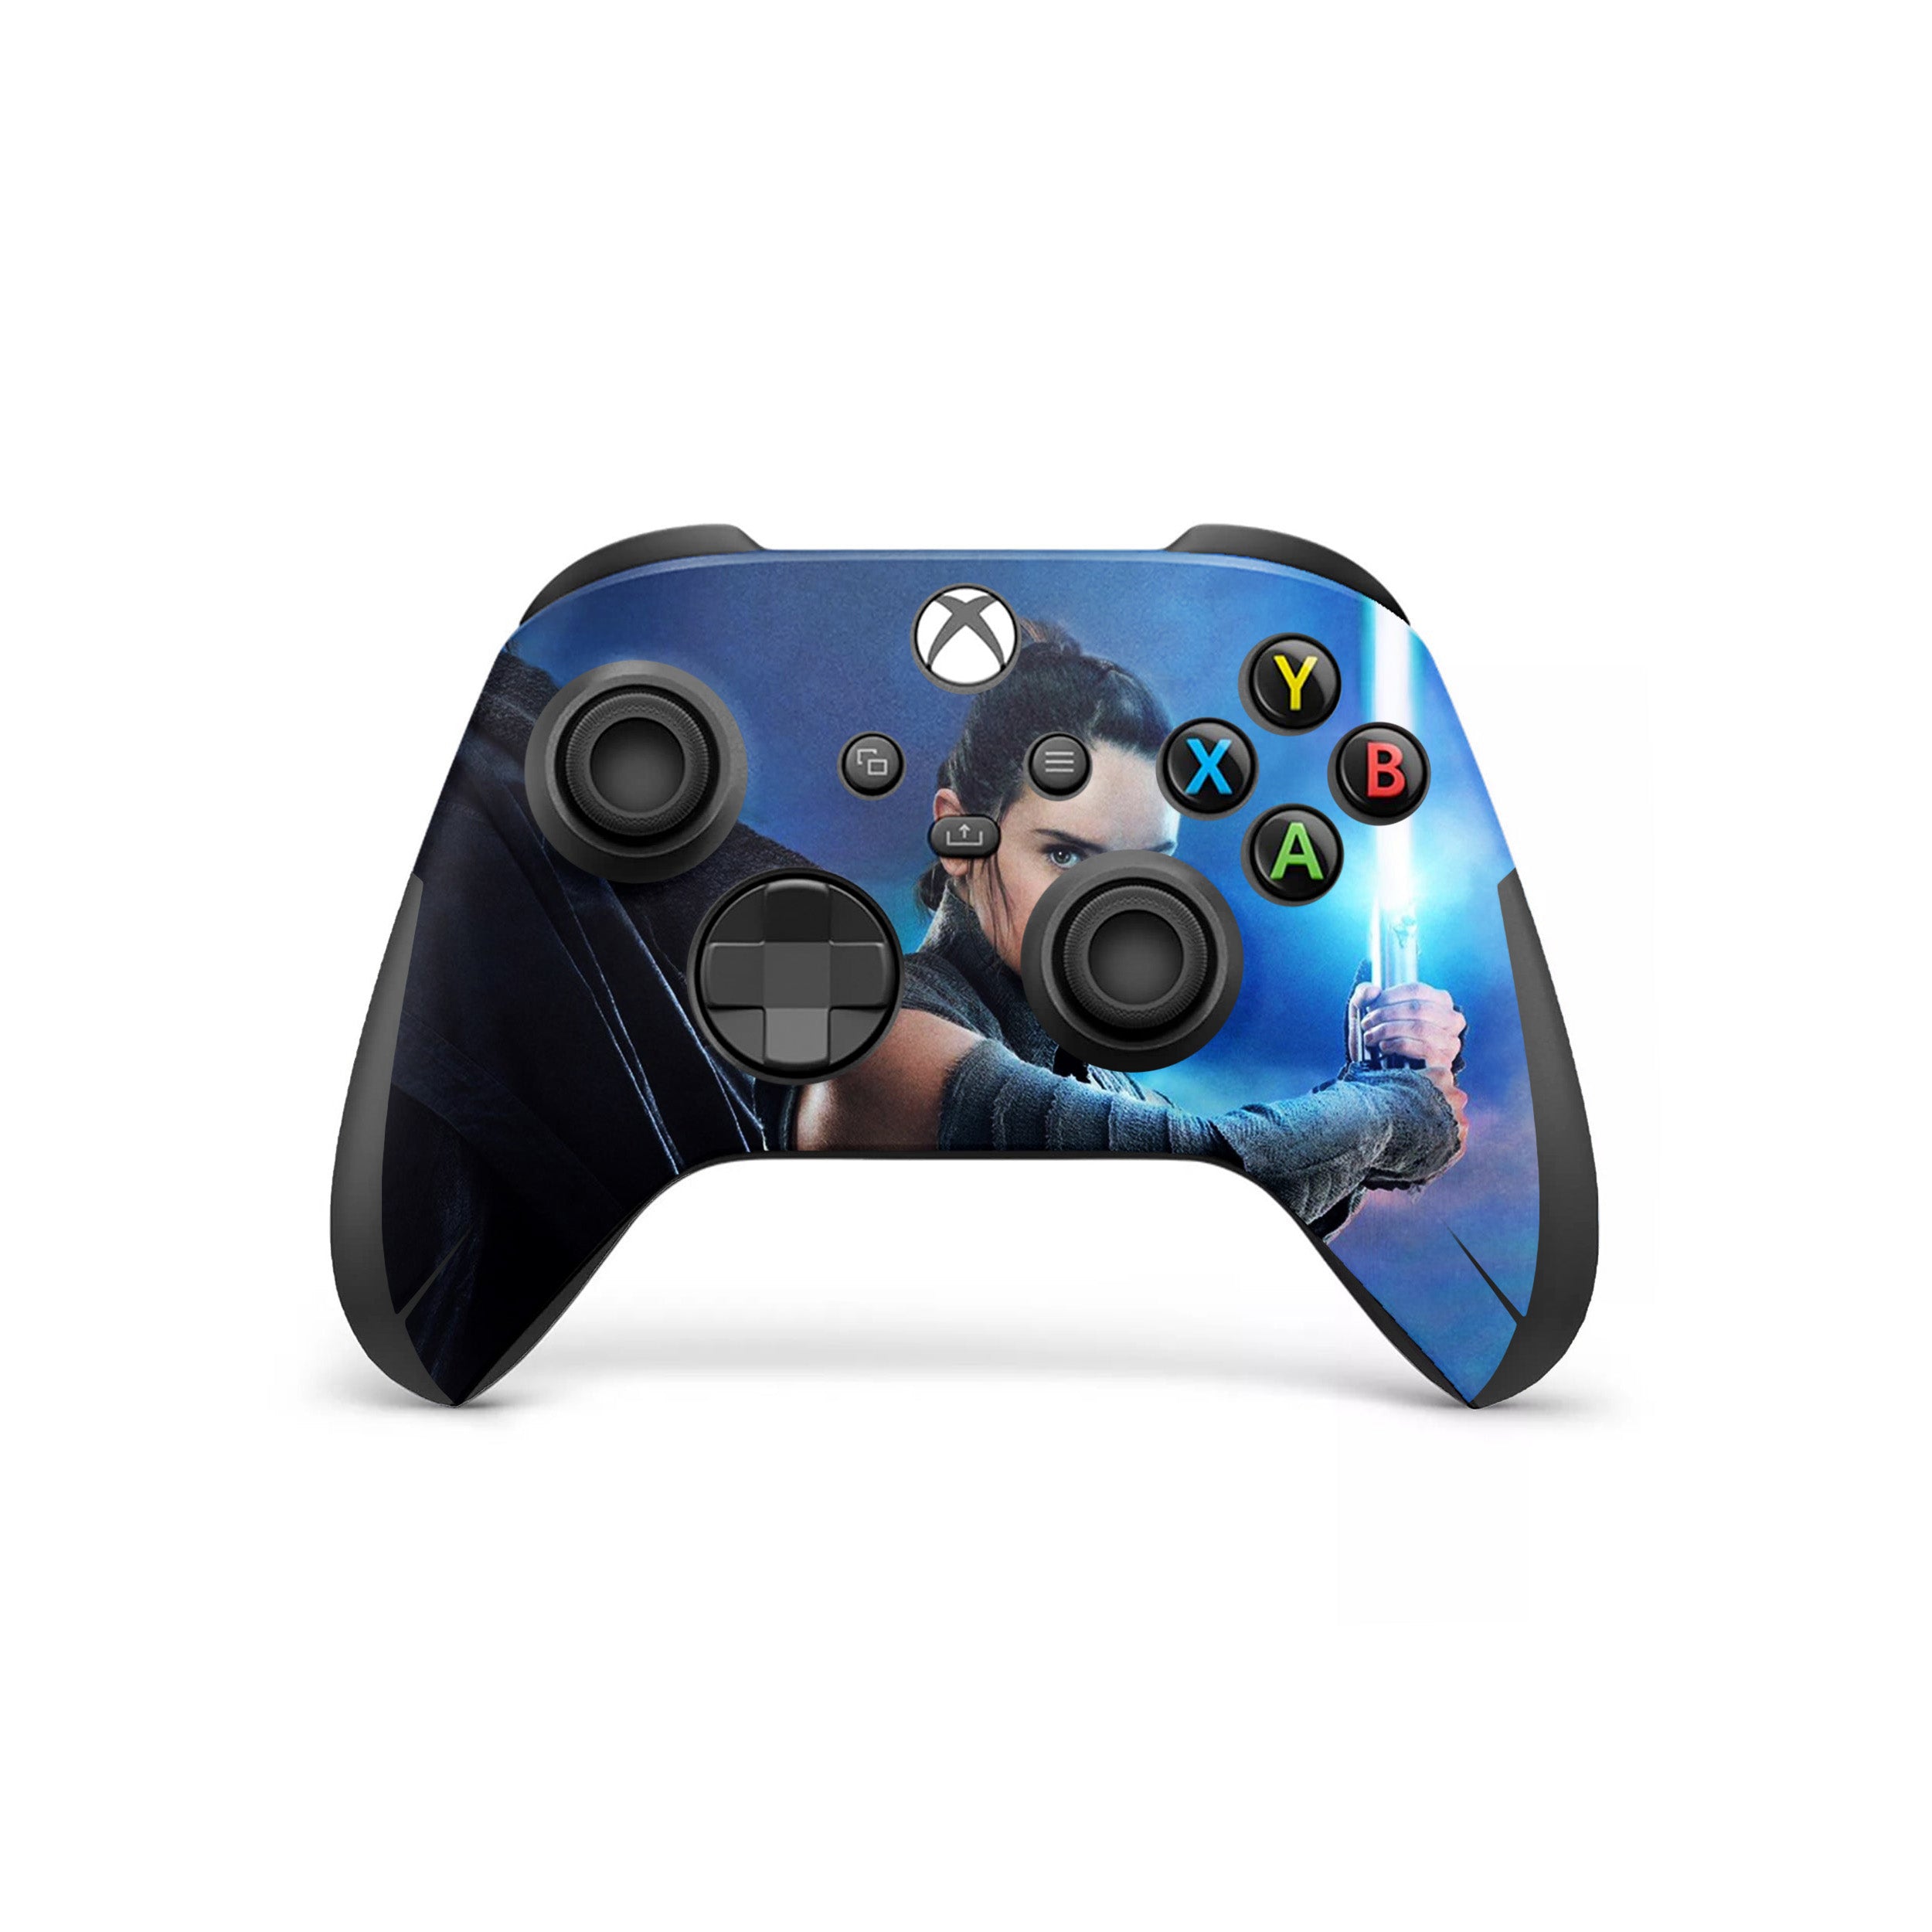 A video game skin featuring a Star Wars Luke Skywalker design for the Xbox Wireless Controller.